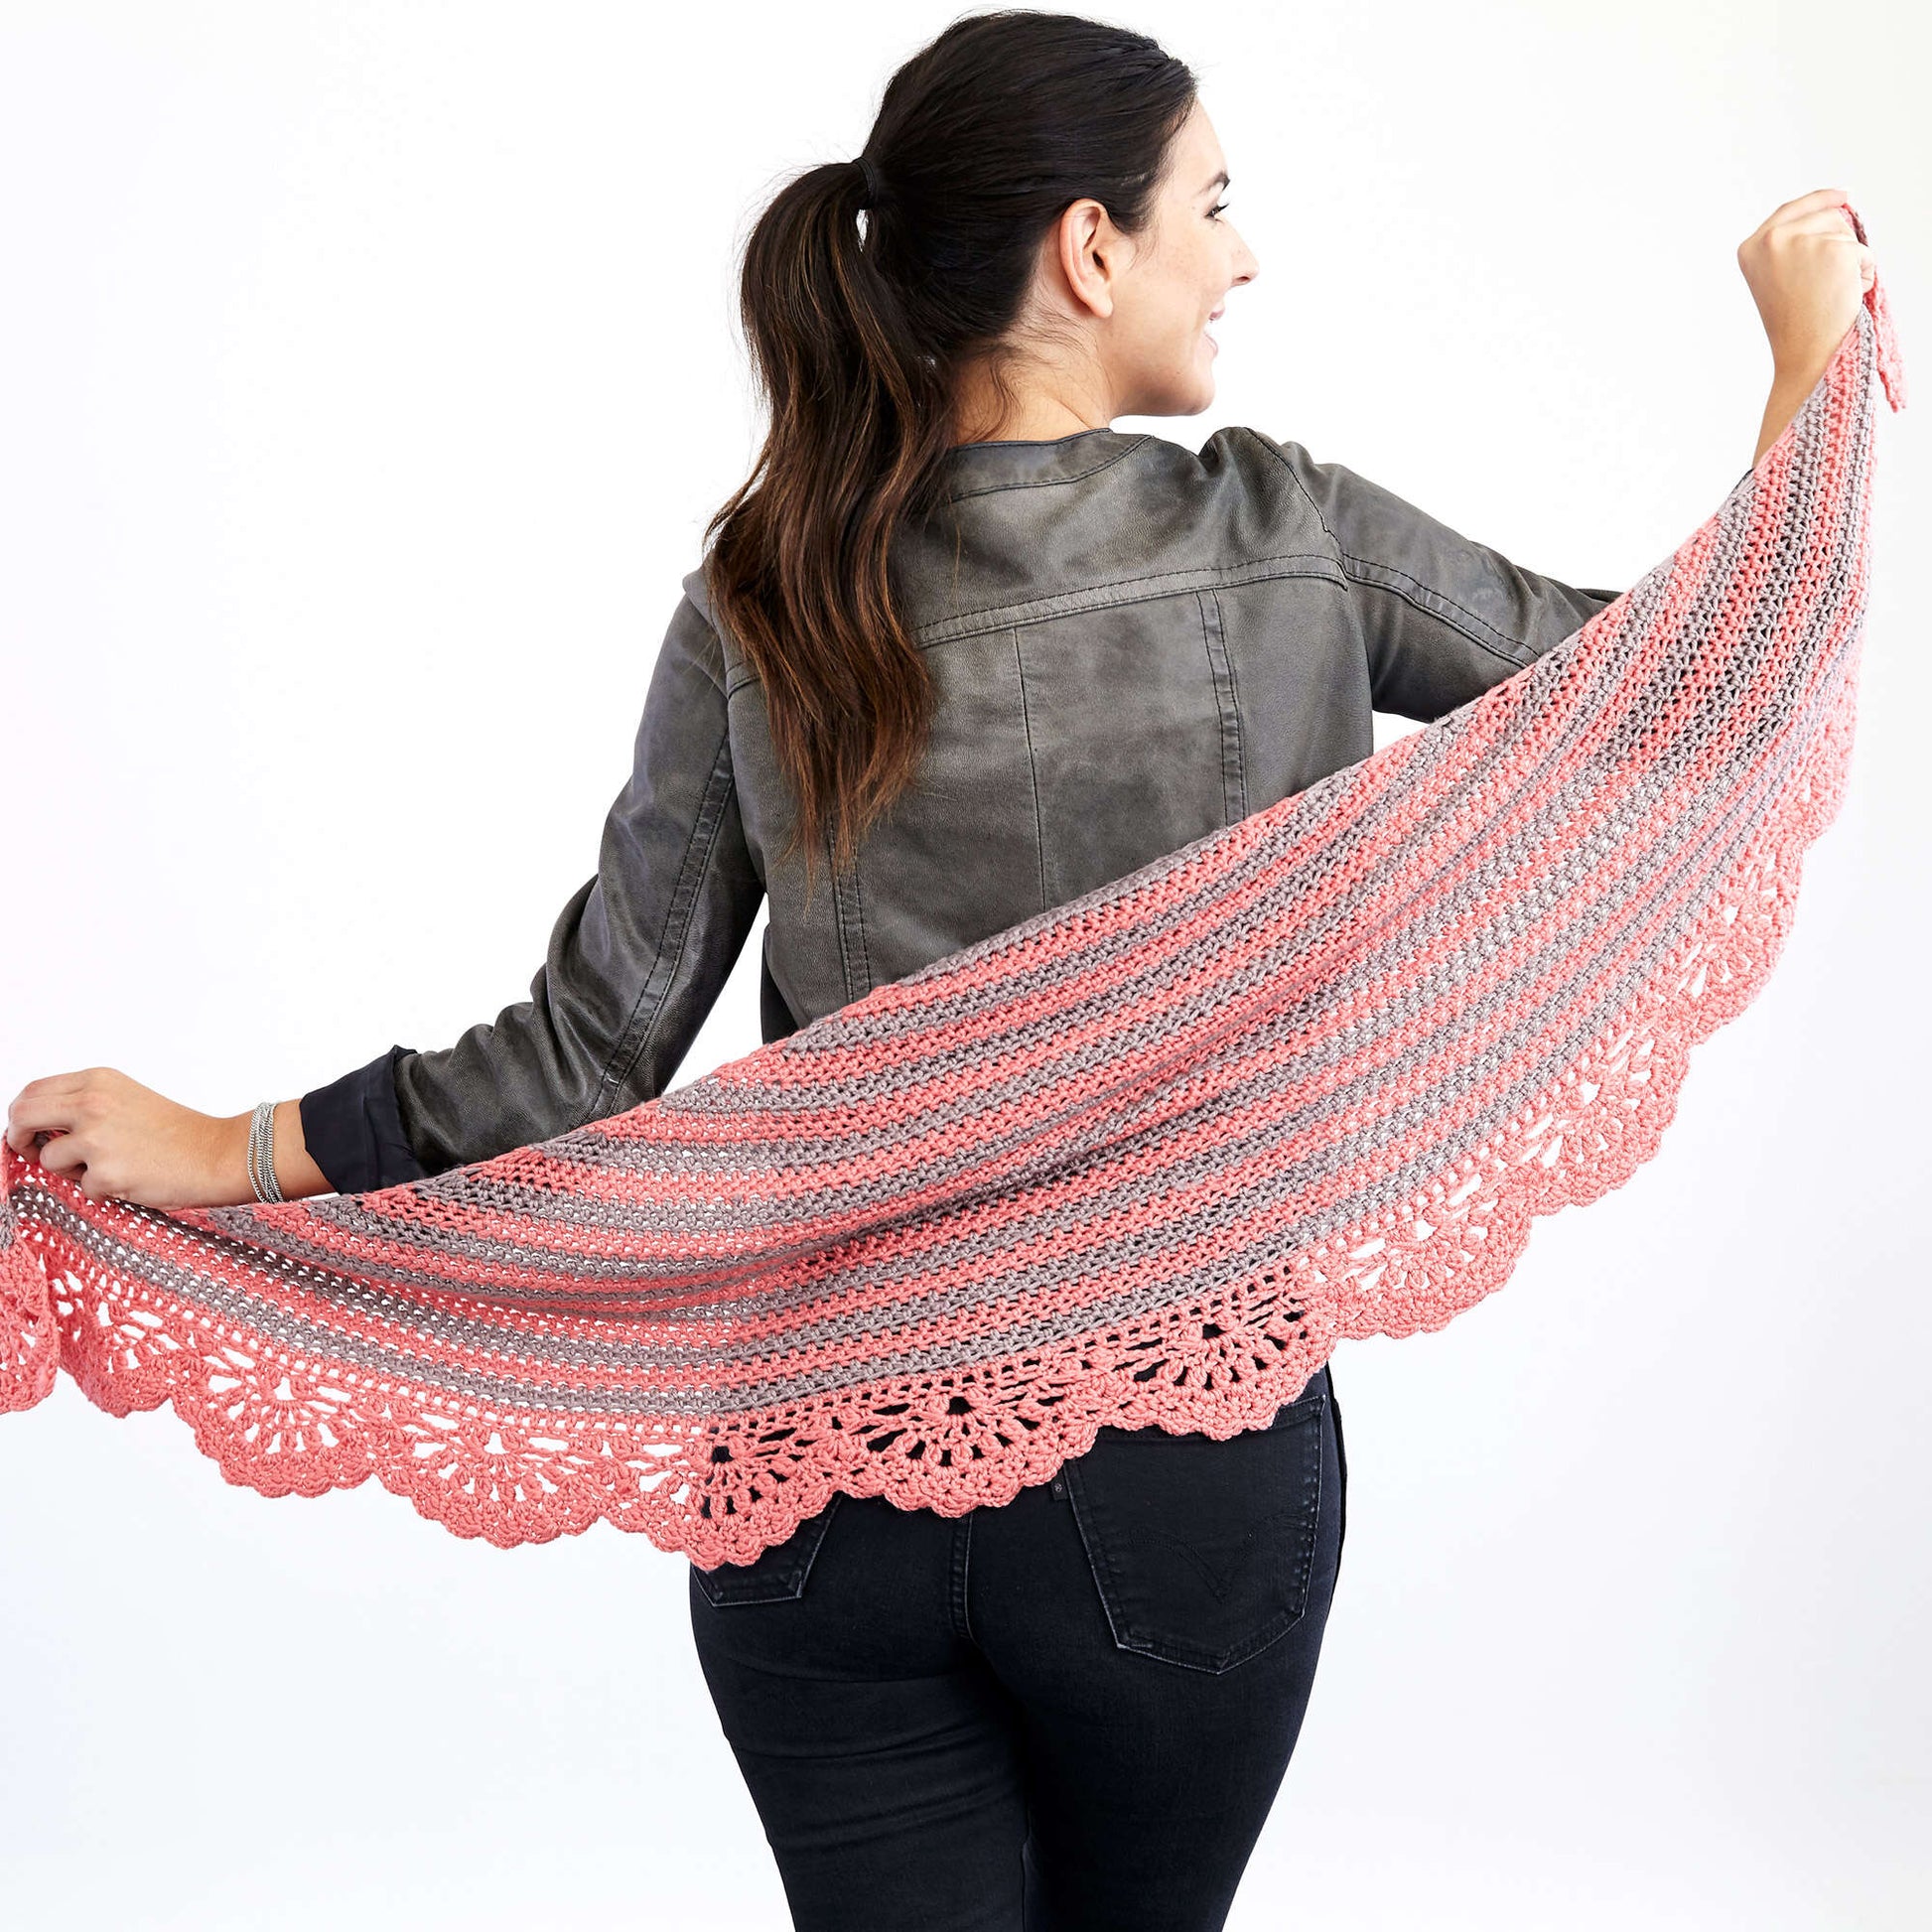 Free Red Heart Chic And Strong Crescent Shawl Crochet Pattern